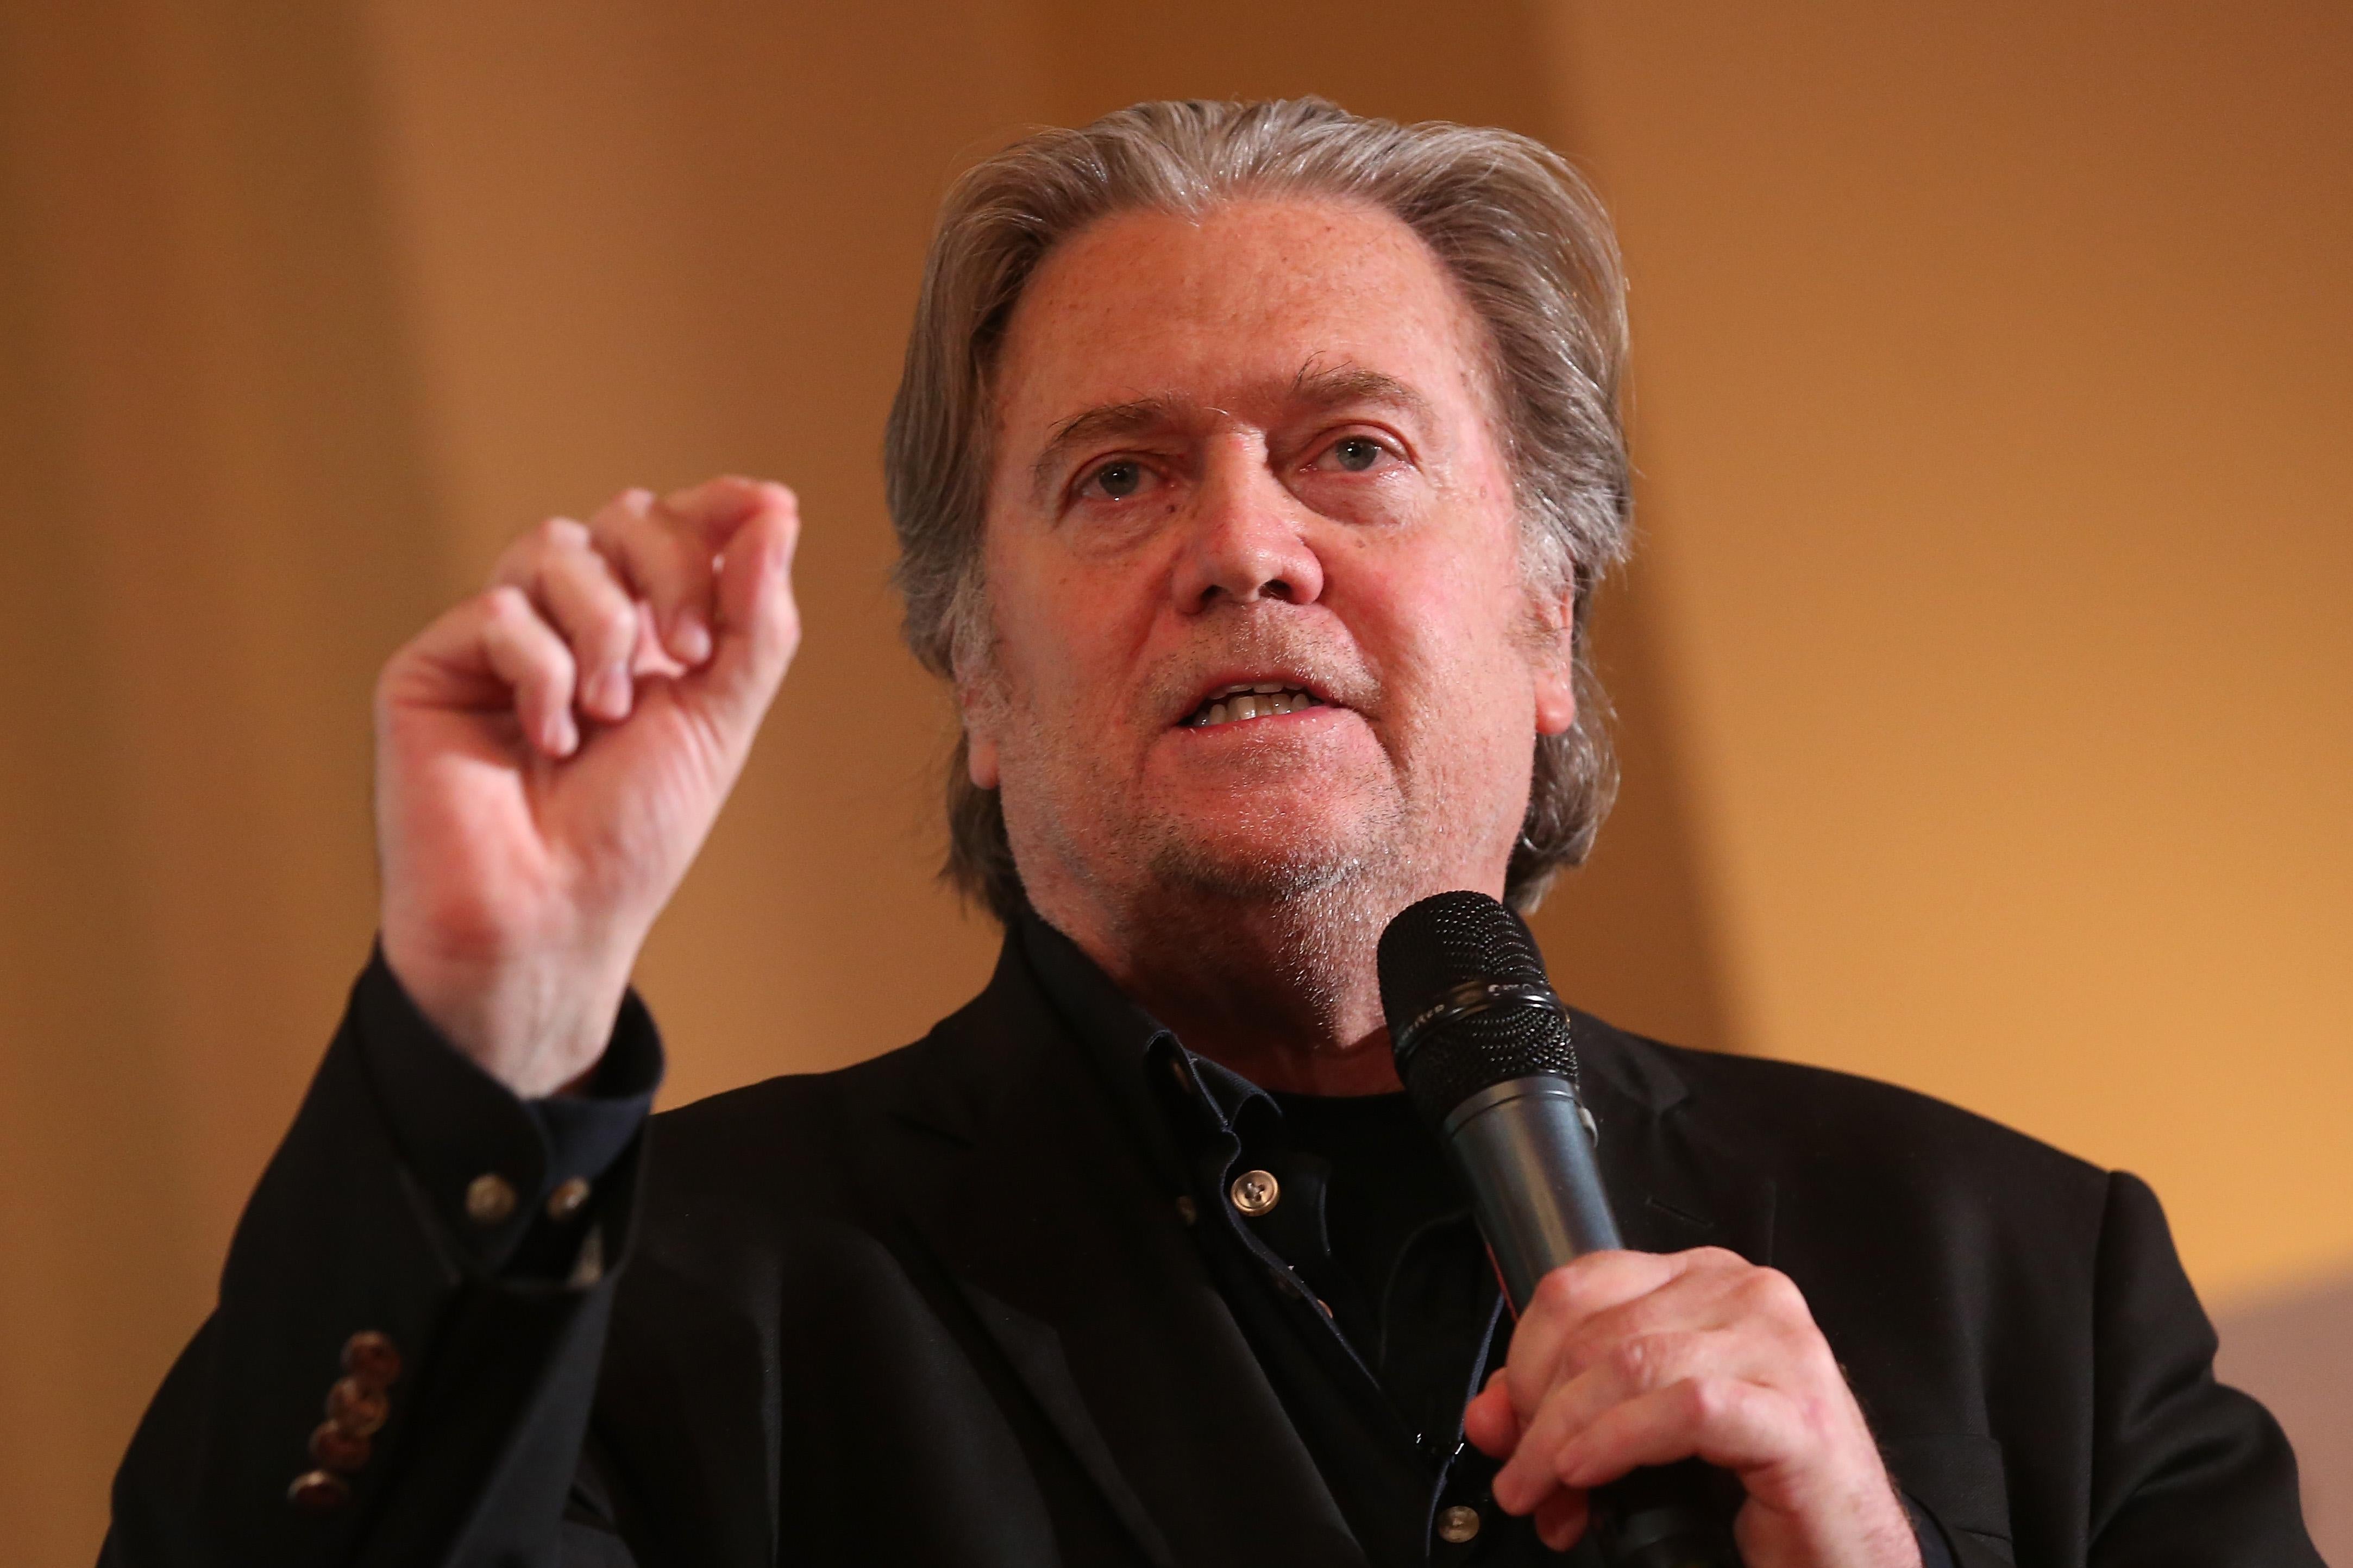 Steve Bannon speaking into a microphone.